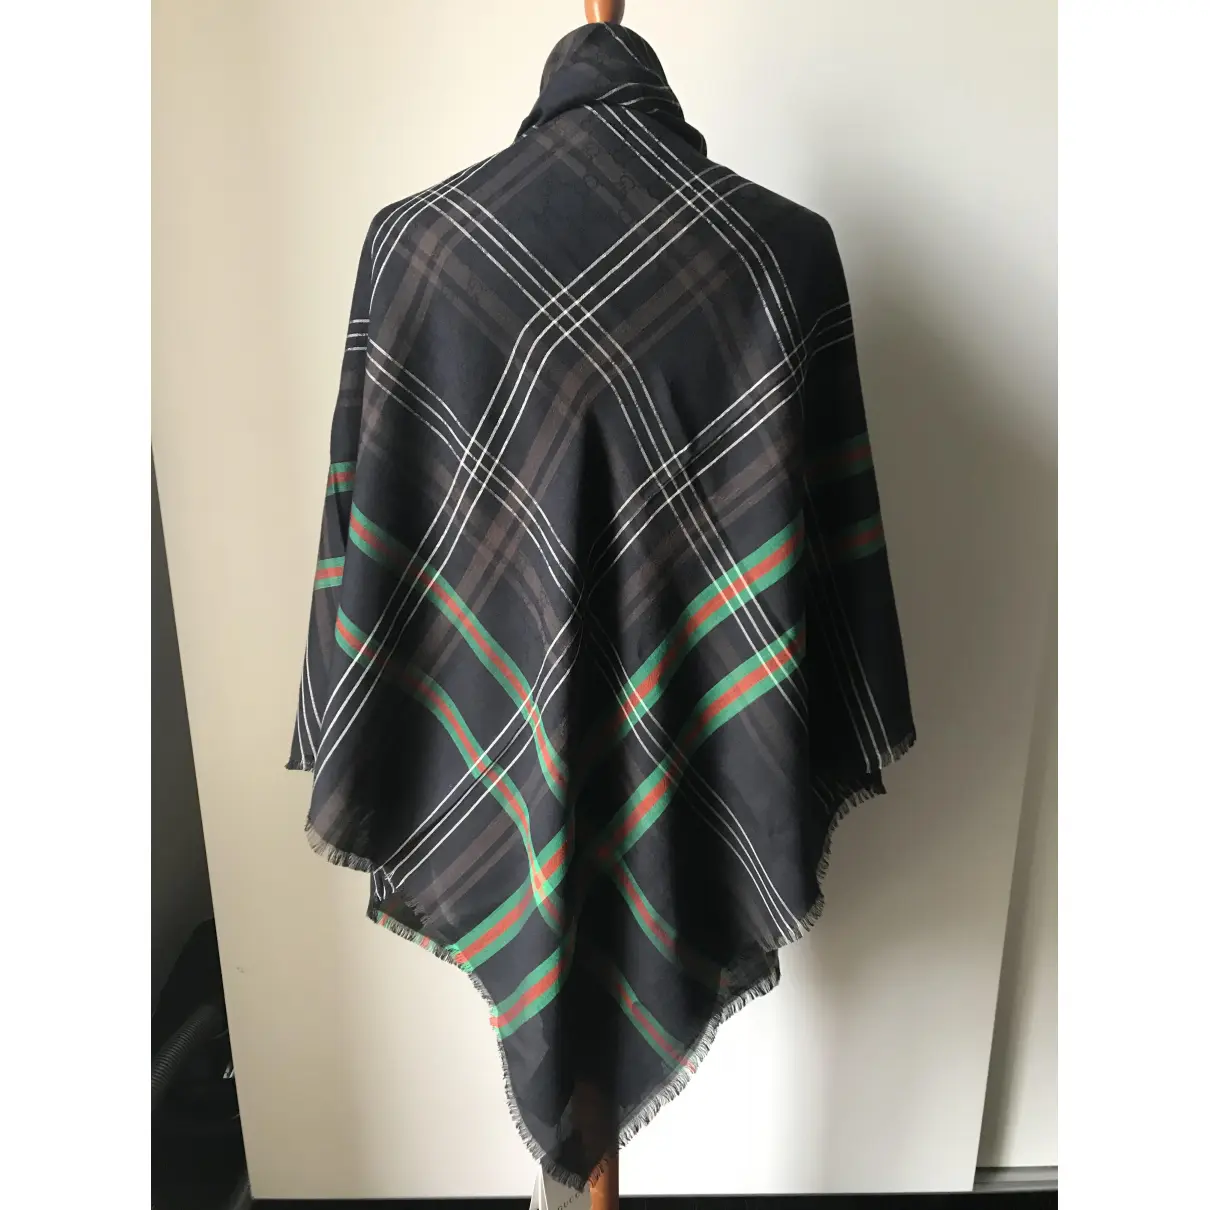 Buy Gucci Wool stole online